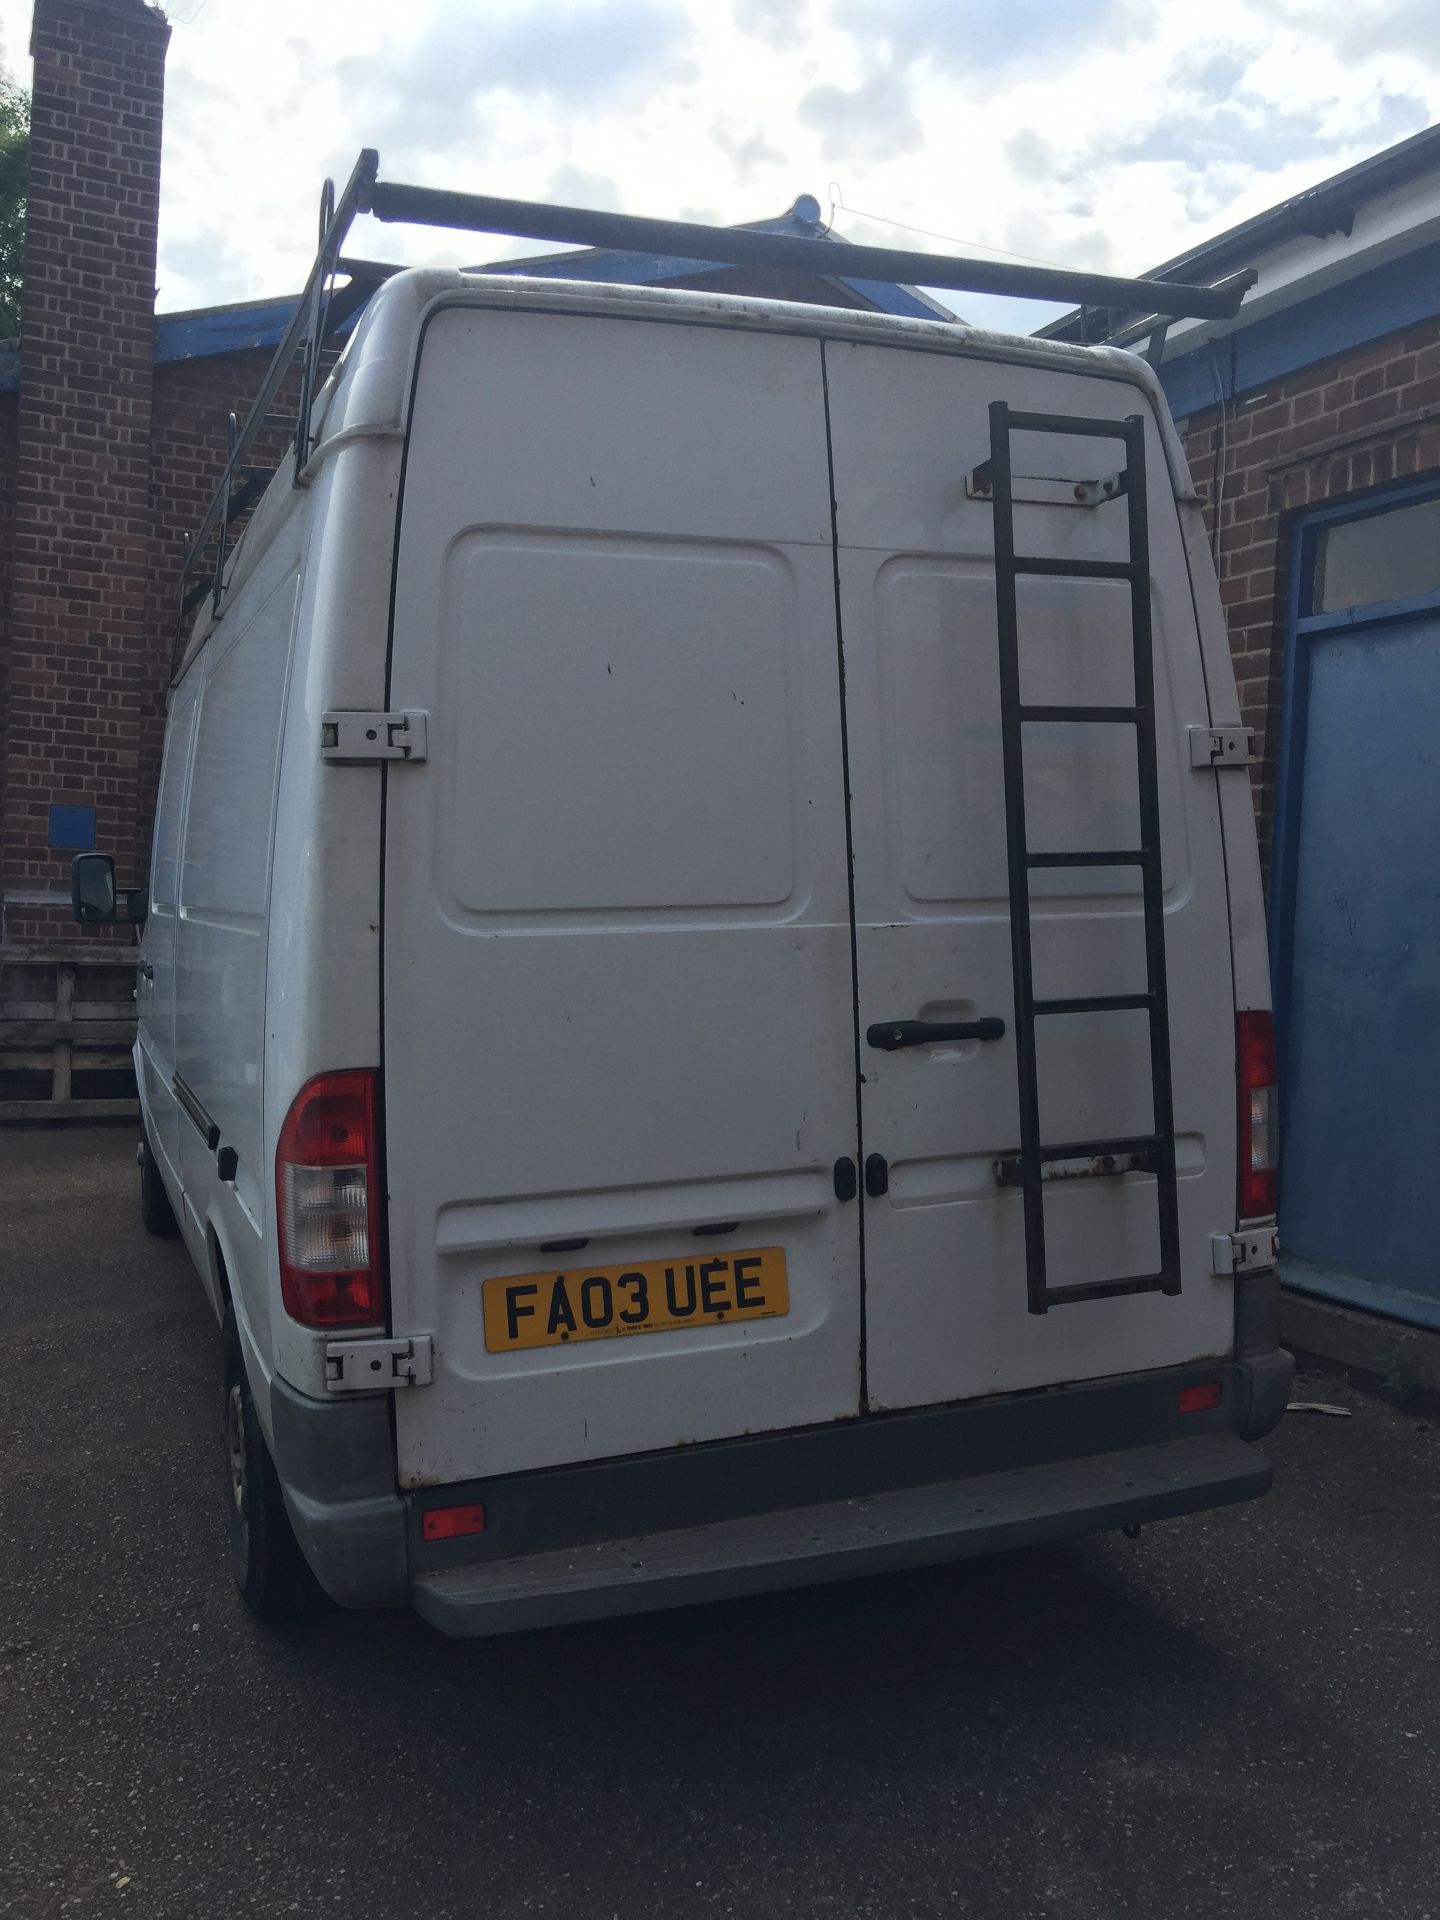 VW Sprinter 132,000 miles recently serviced reg FA03 UEE with roof rack good condition (DERBY) - Image 6 of 10